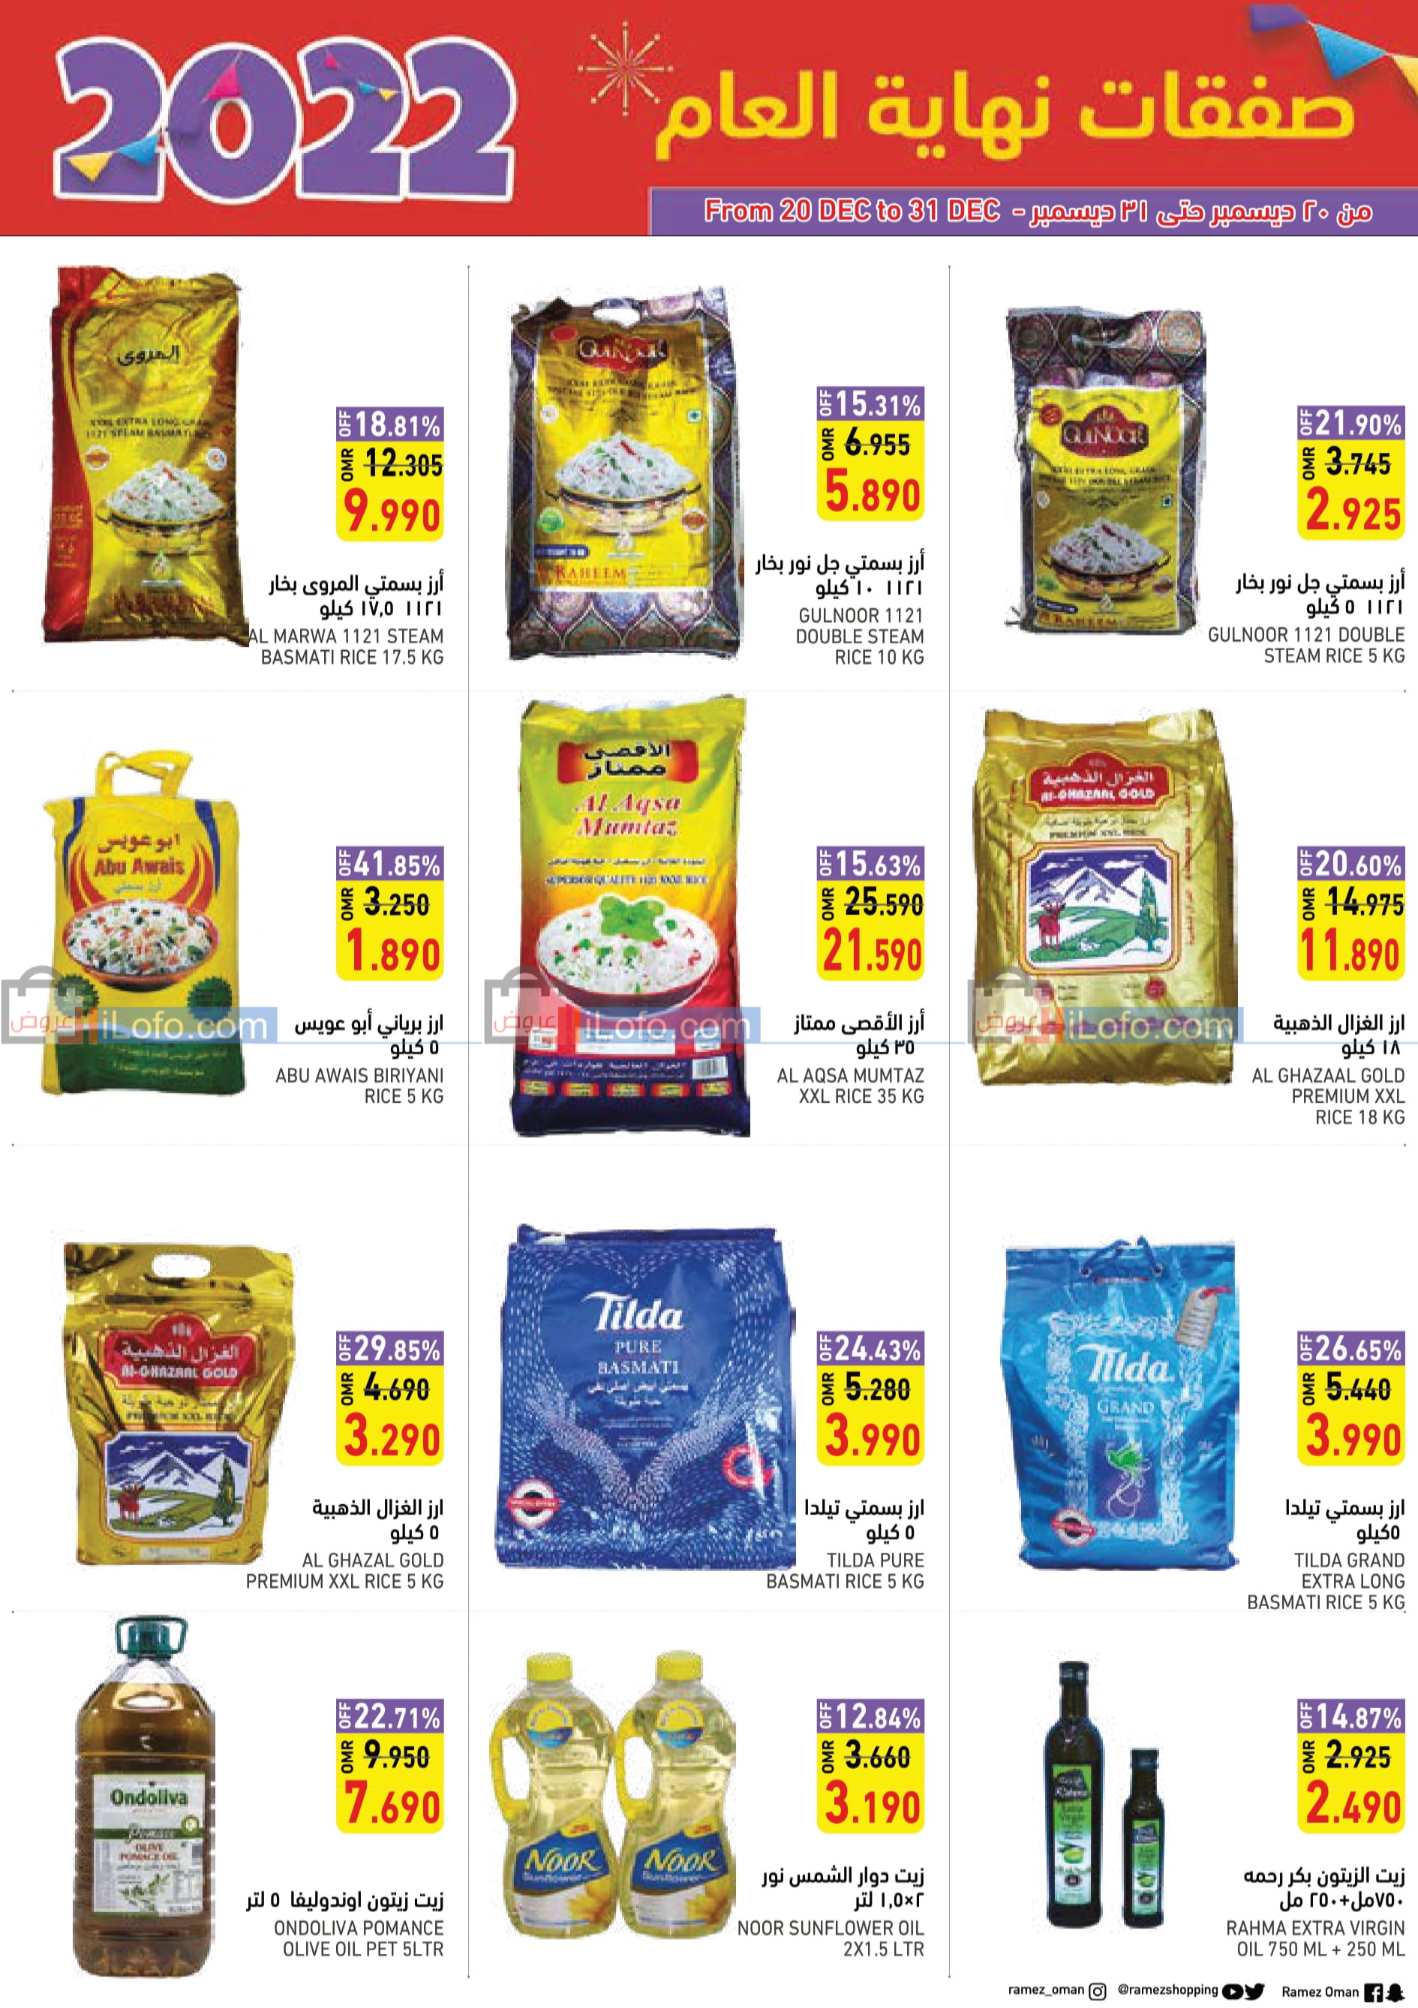 Page 2 at Year End Deals at Ramez Oman offers, Sohar branch